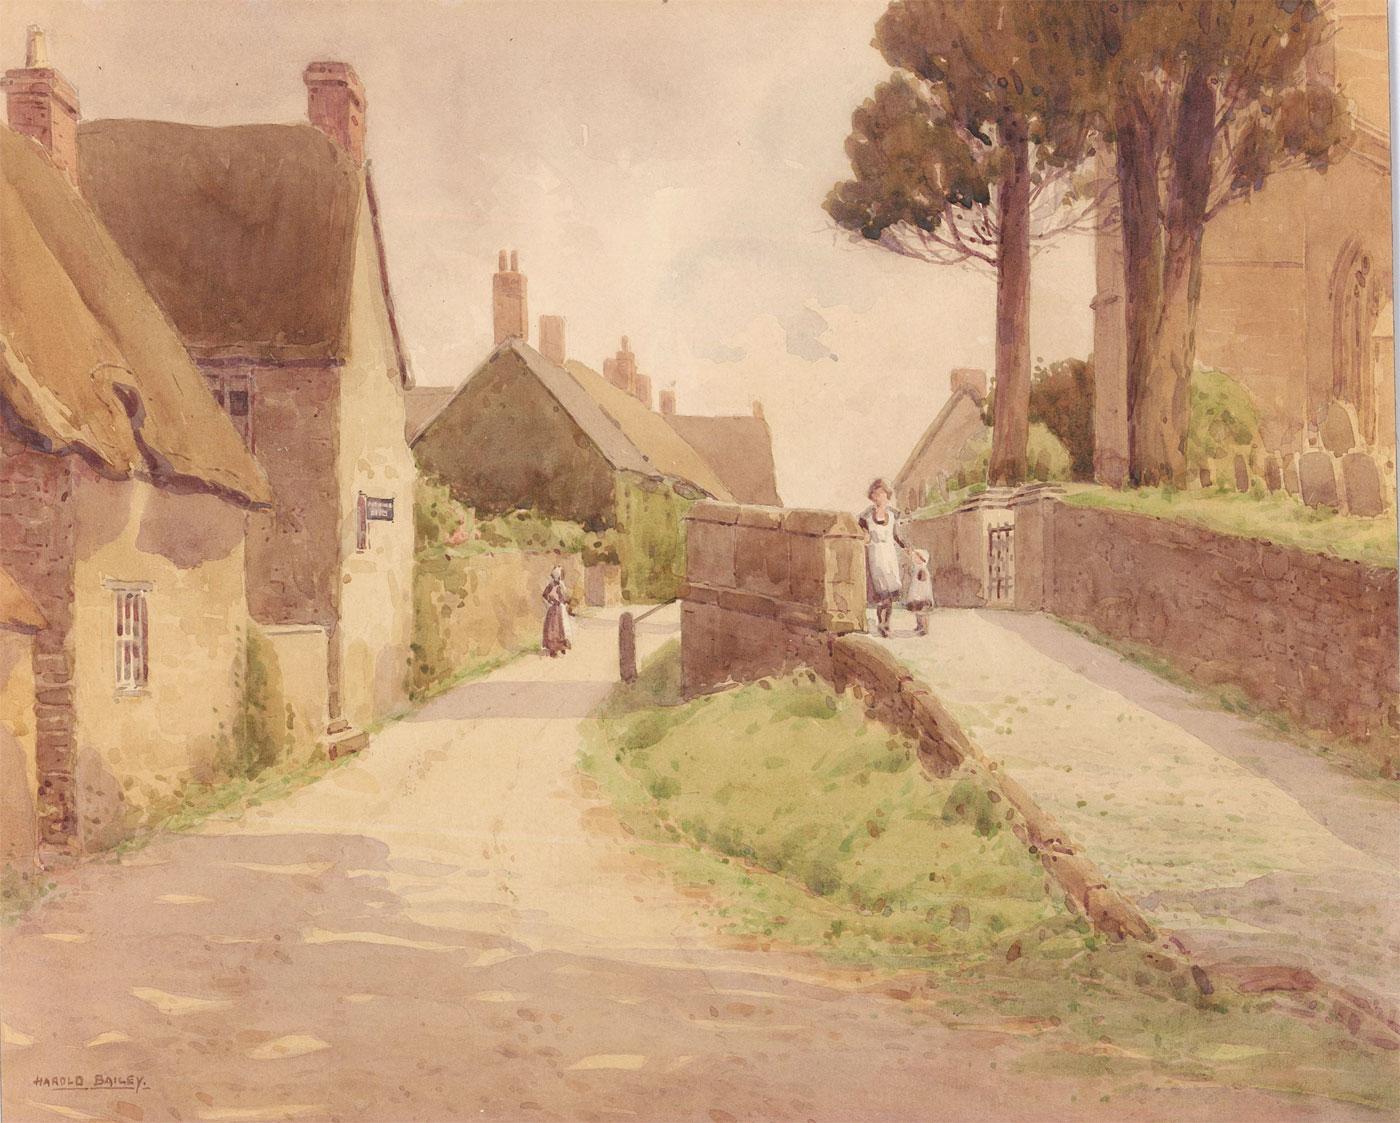 A delightful watercolour scene taking in the beautiful village of Wroxton, Oxfordshire. To the right stands All Saints church, where a nanny and child can be seen passing on the raised walk. Further up the street another women is paused, glancing